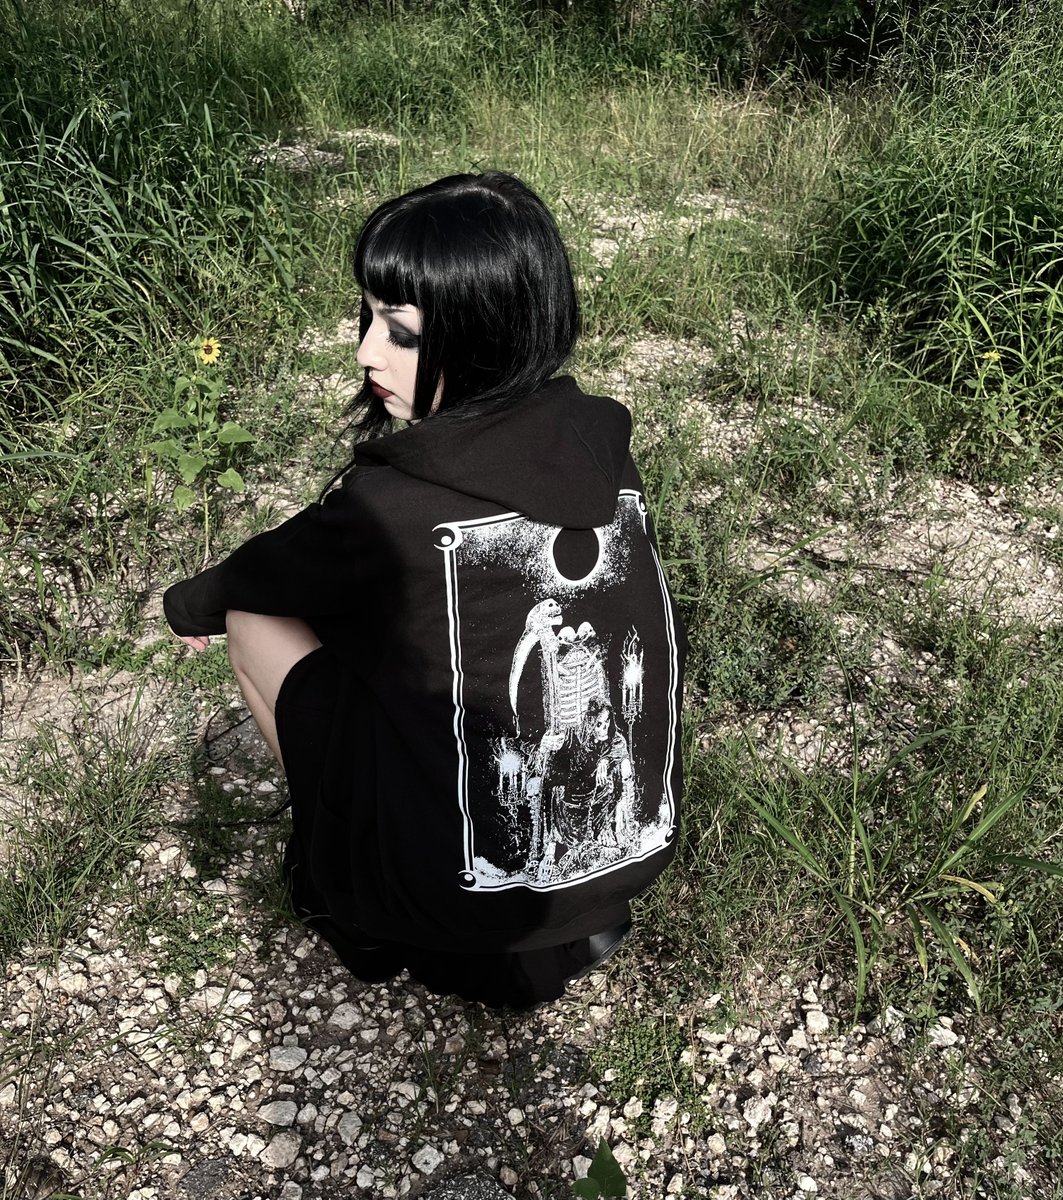 Be ready for all weather with our Grim Reaper's Revenge Hoodie like @aconitemercury shown rocking our comfy hoodie!

#VampireFreaks #GothFashion #GothStyle #GothHoodie #GrimReaper